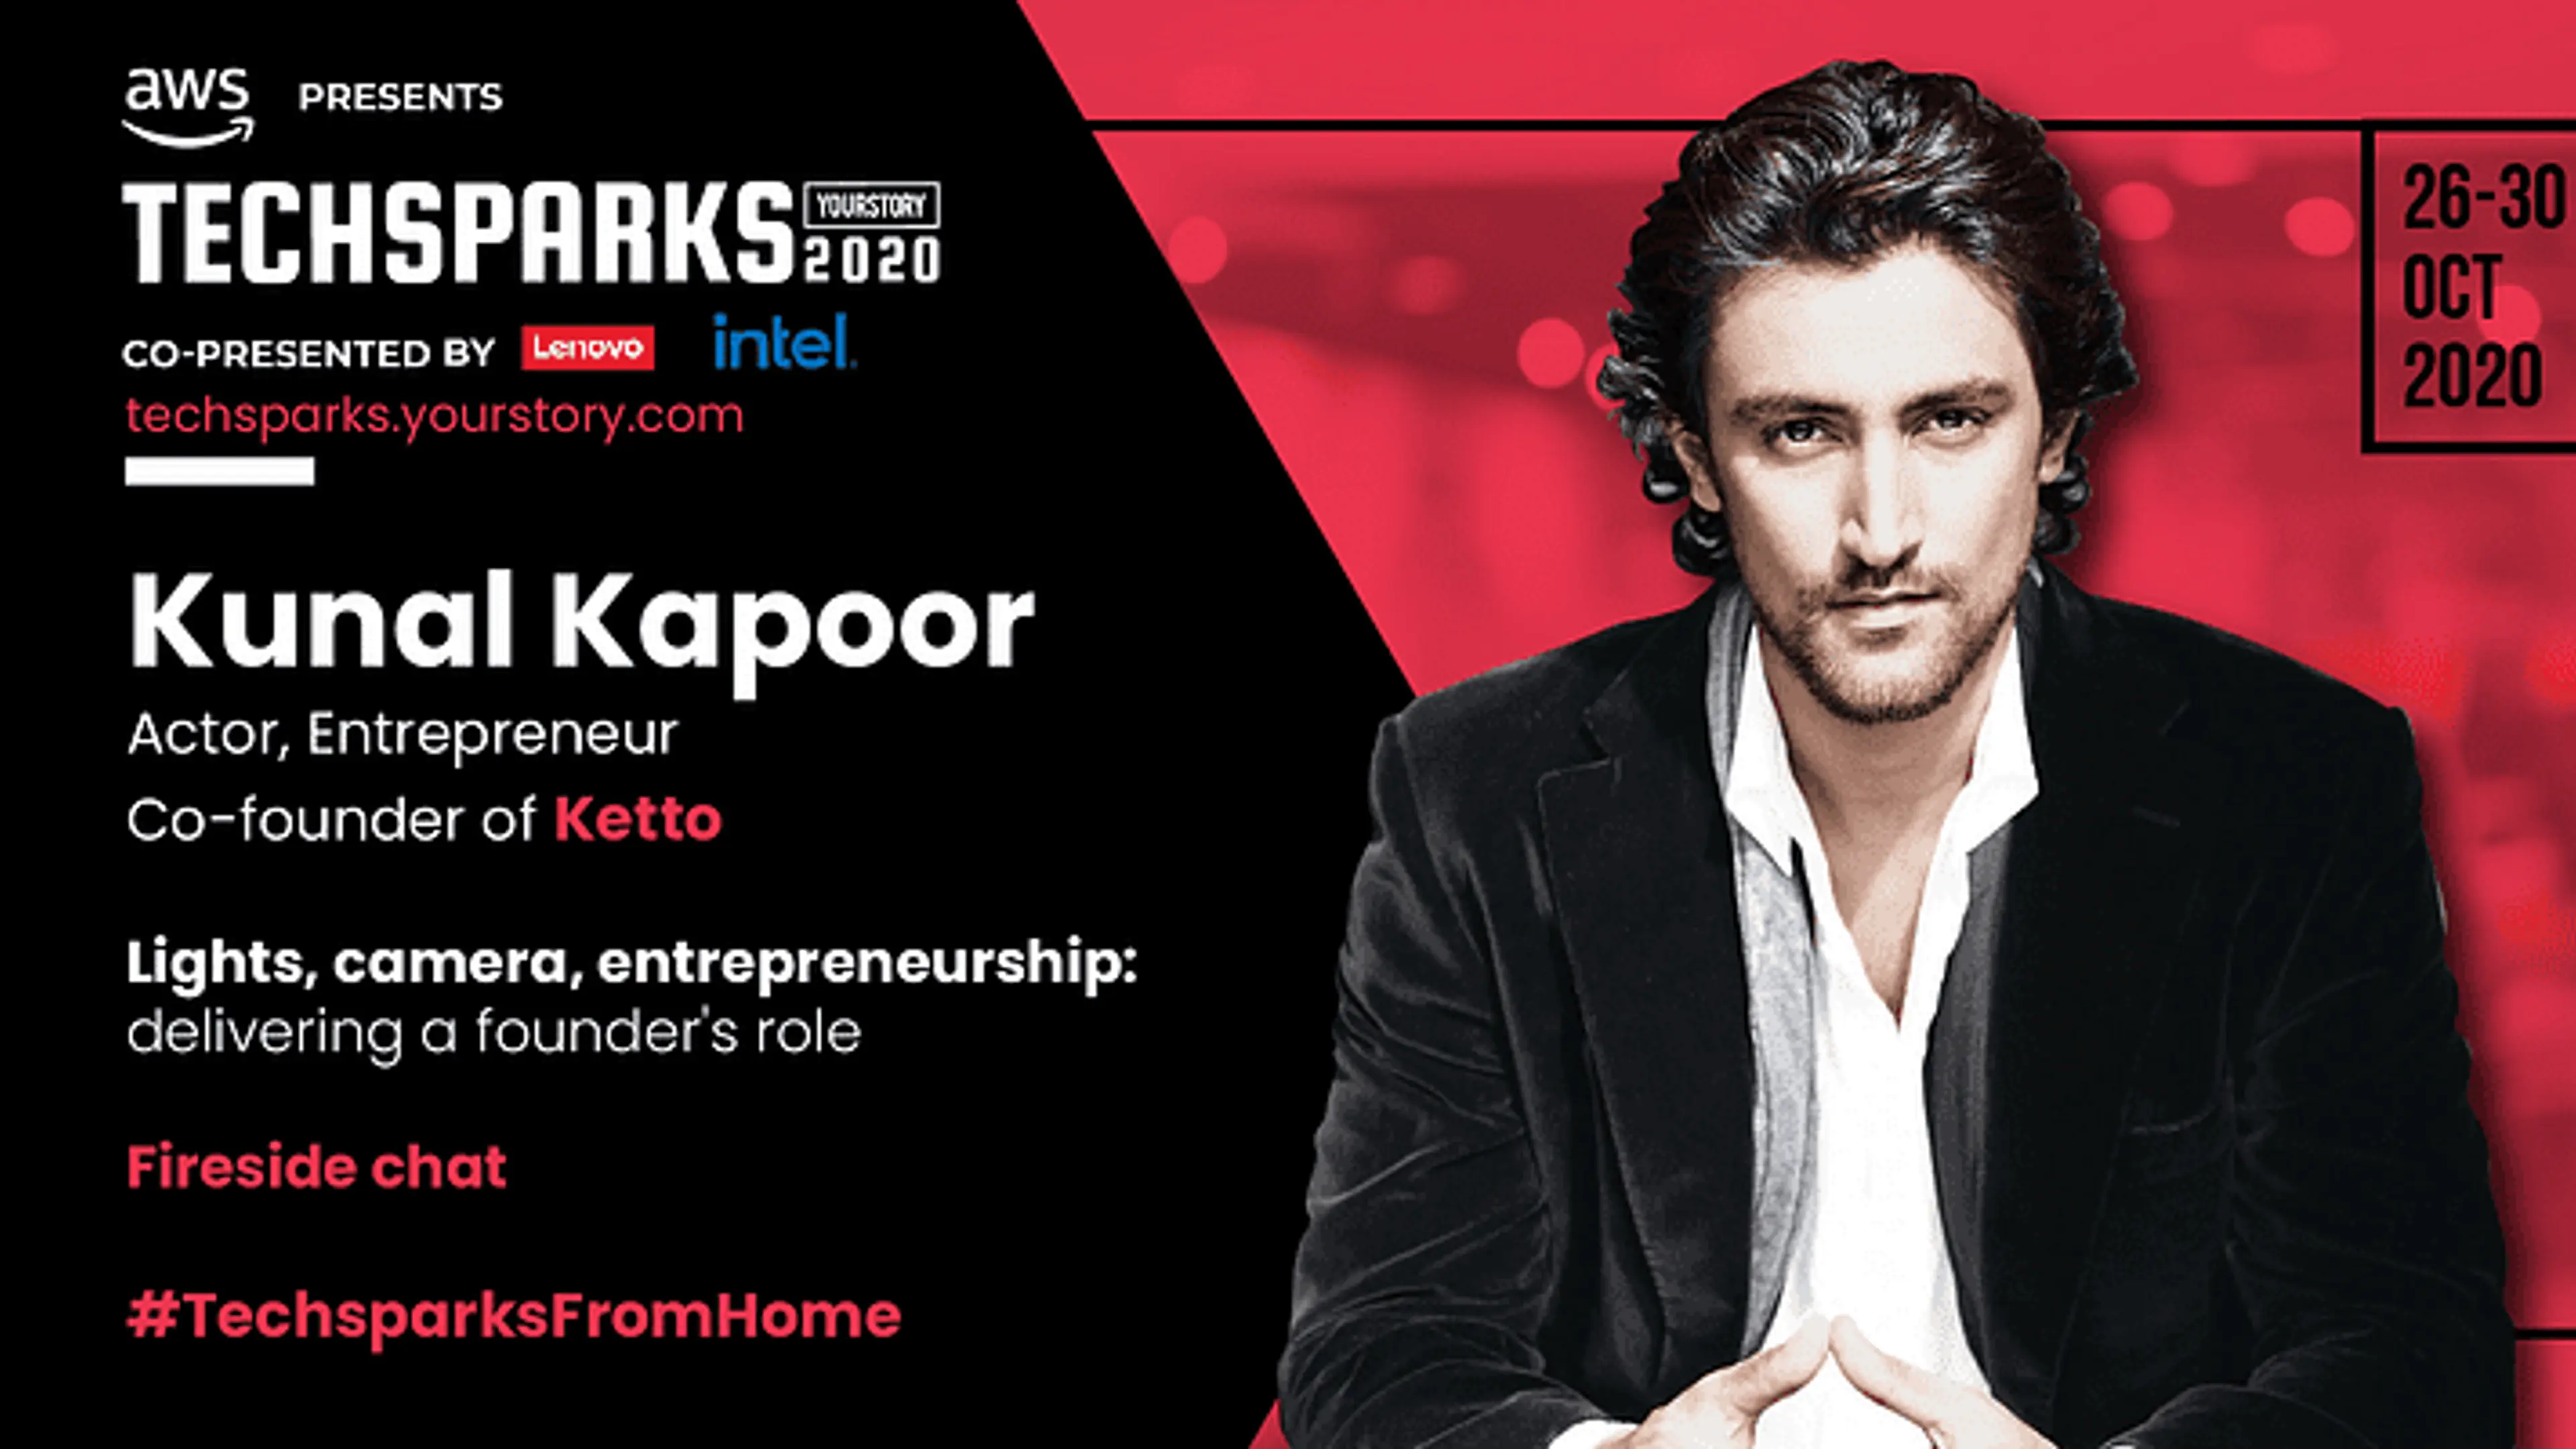 [TechSparks 2020] Lights, camera, entrepreneurship: how Kunal Kapoor translated his dream of a social-tech startup into reality